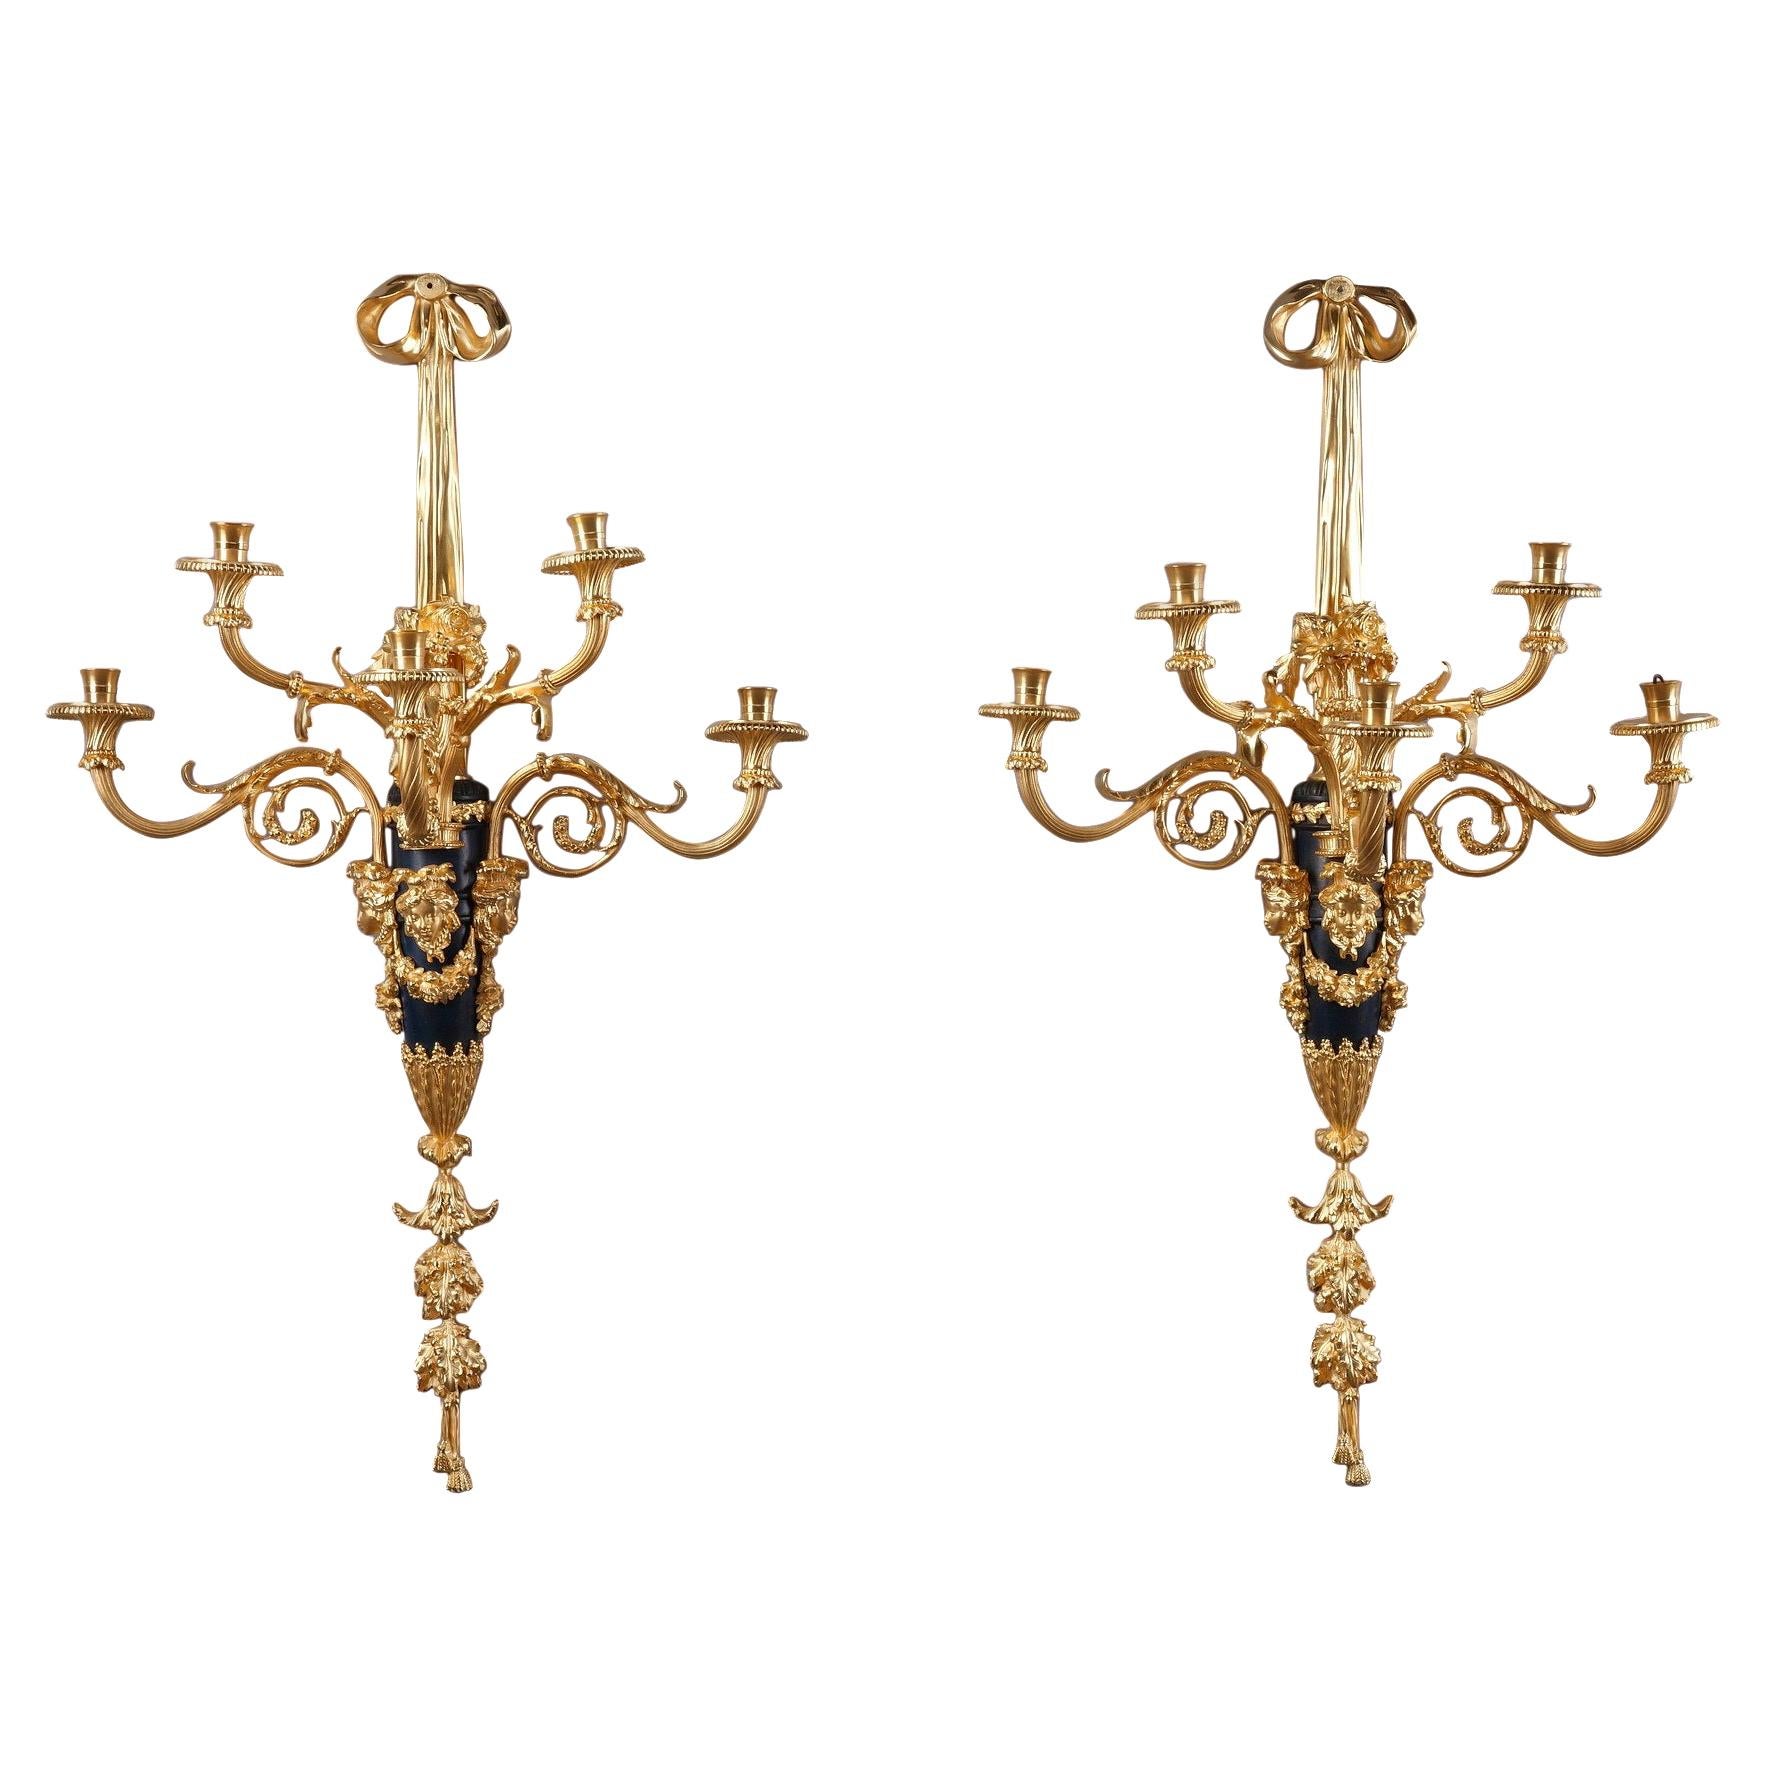 Monumental Louis XVI Style Wall Sconces after Thomire For Sale